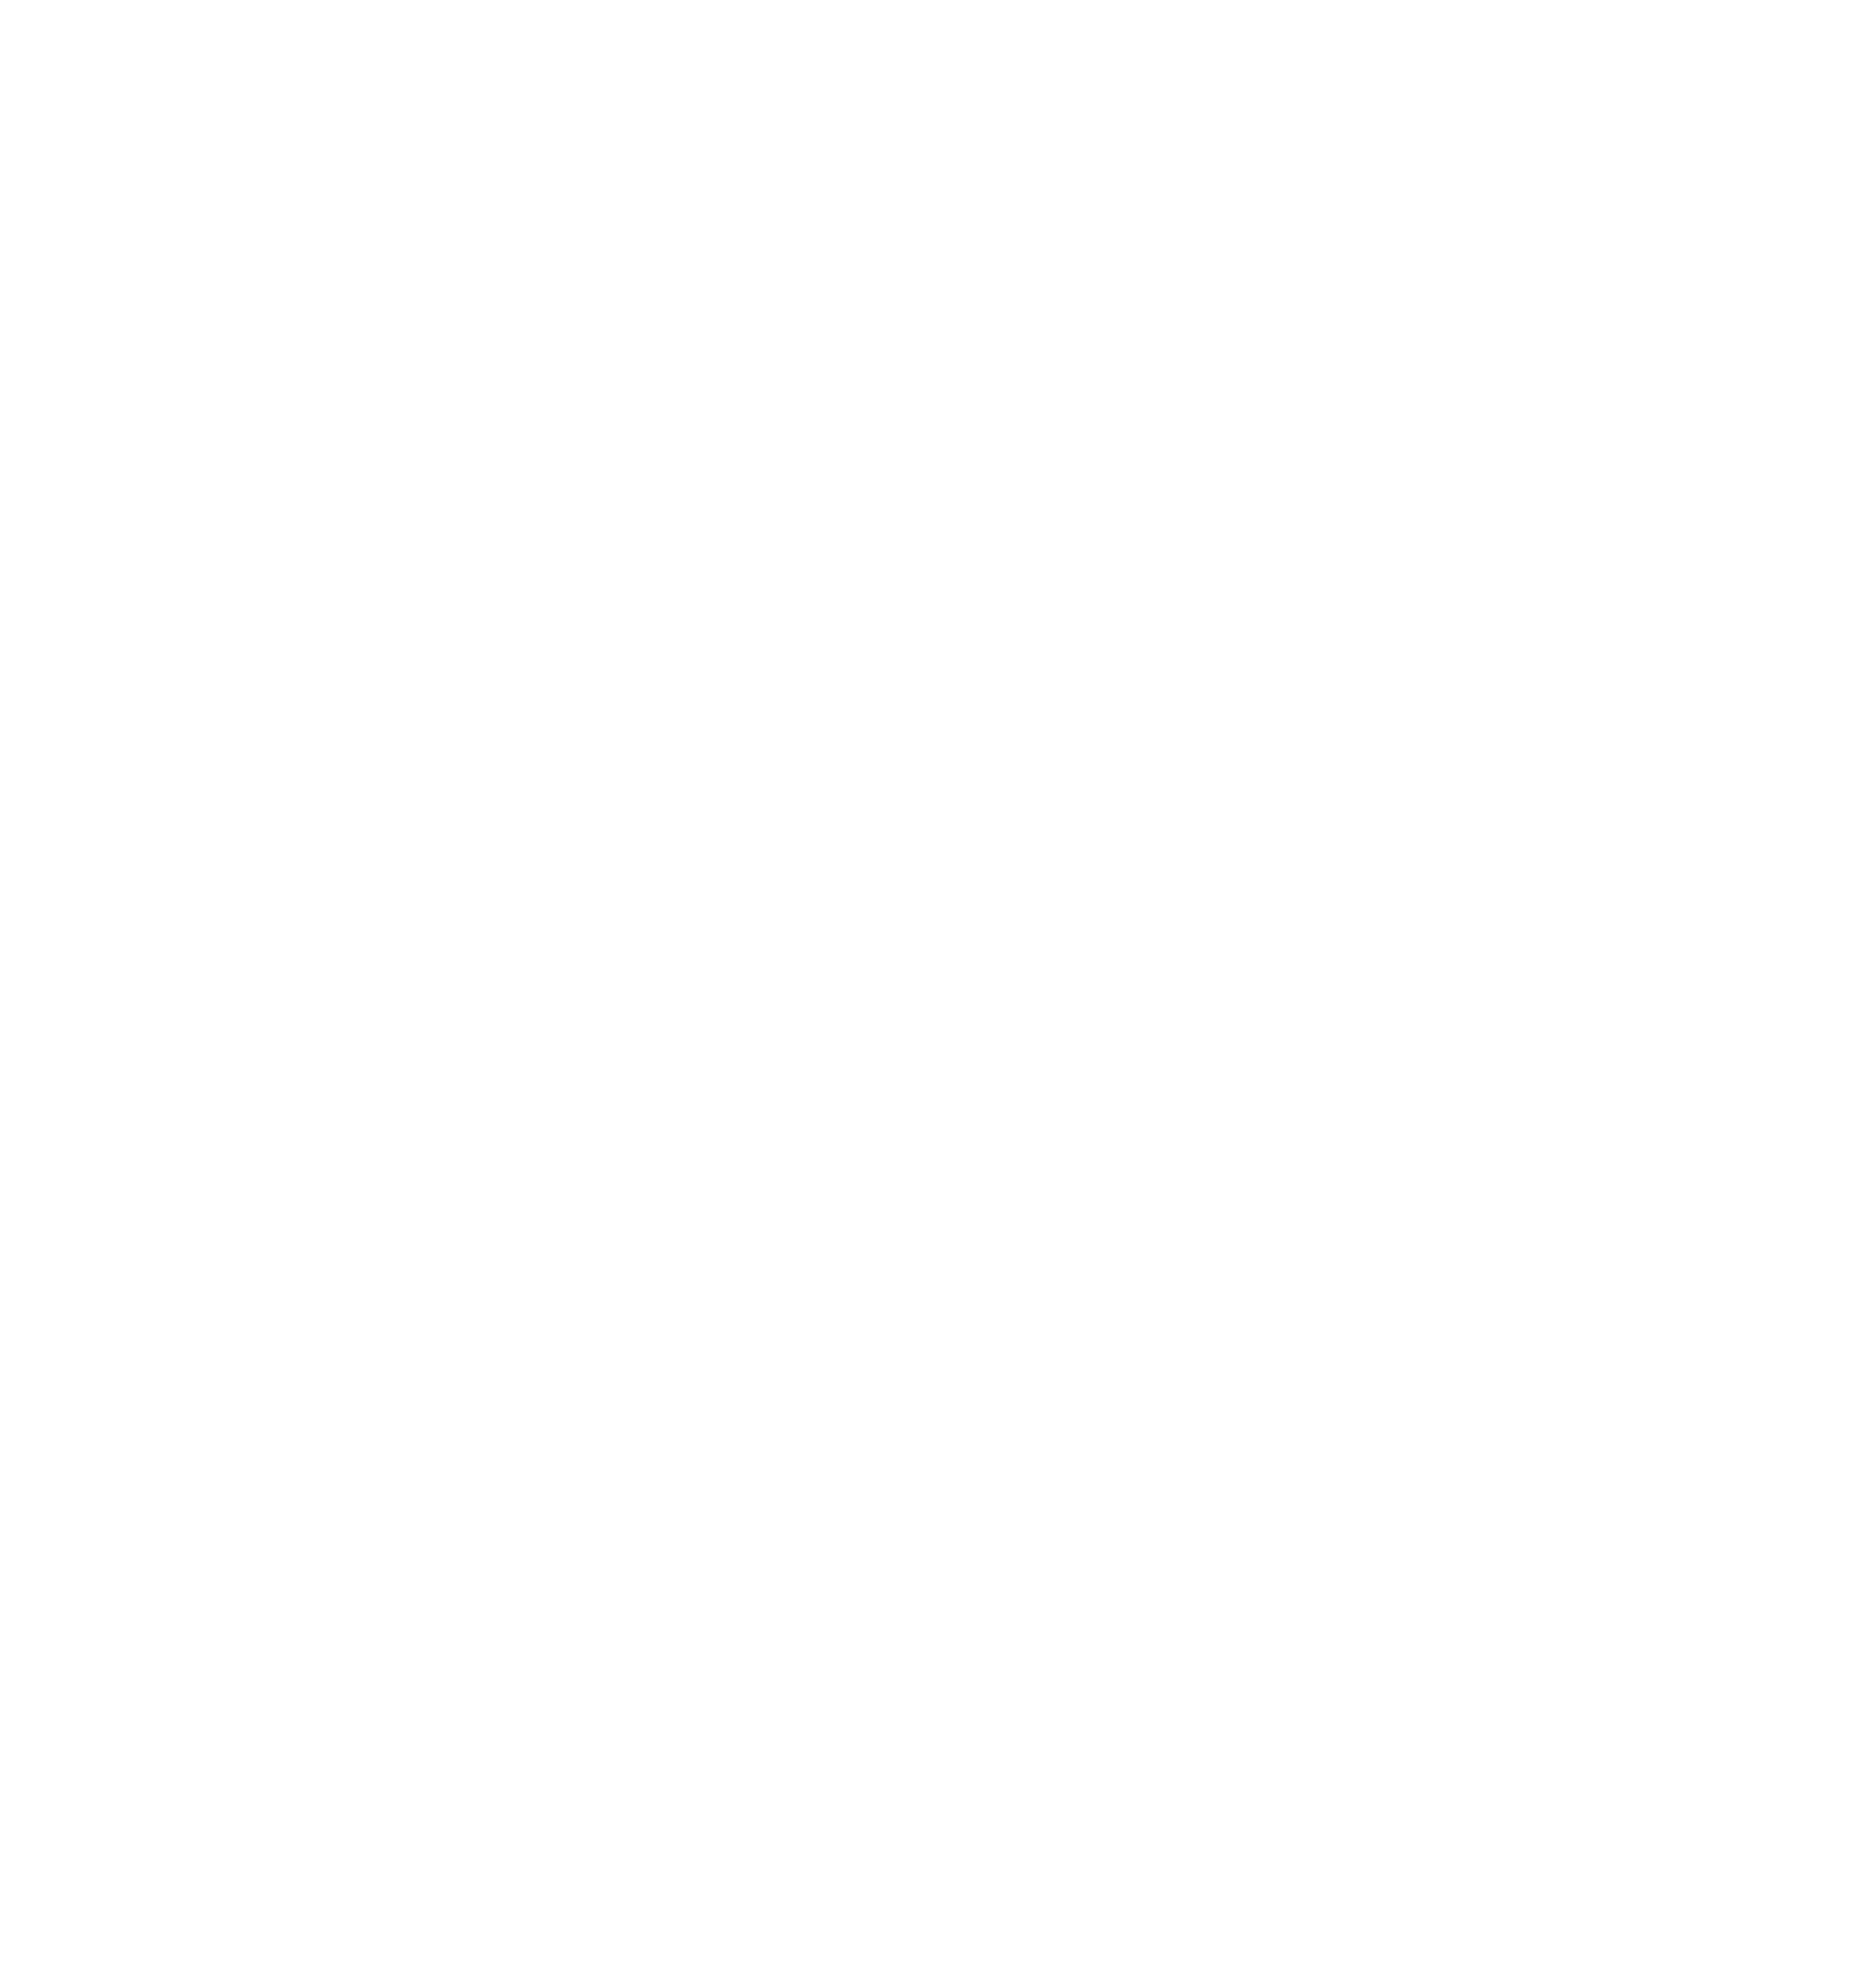 Foster fence white letter